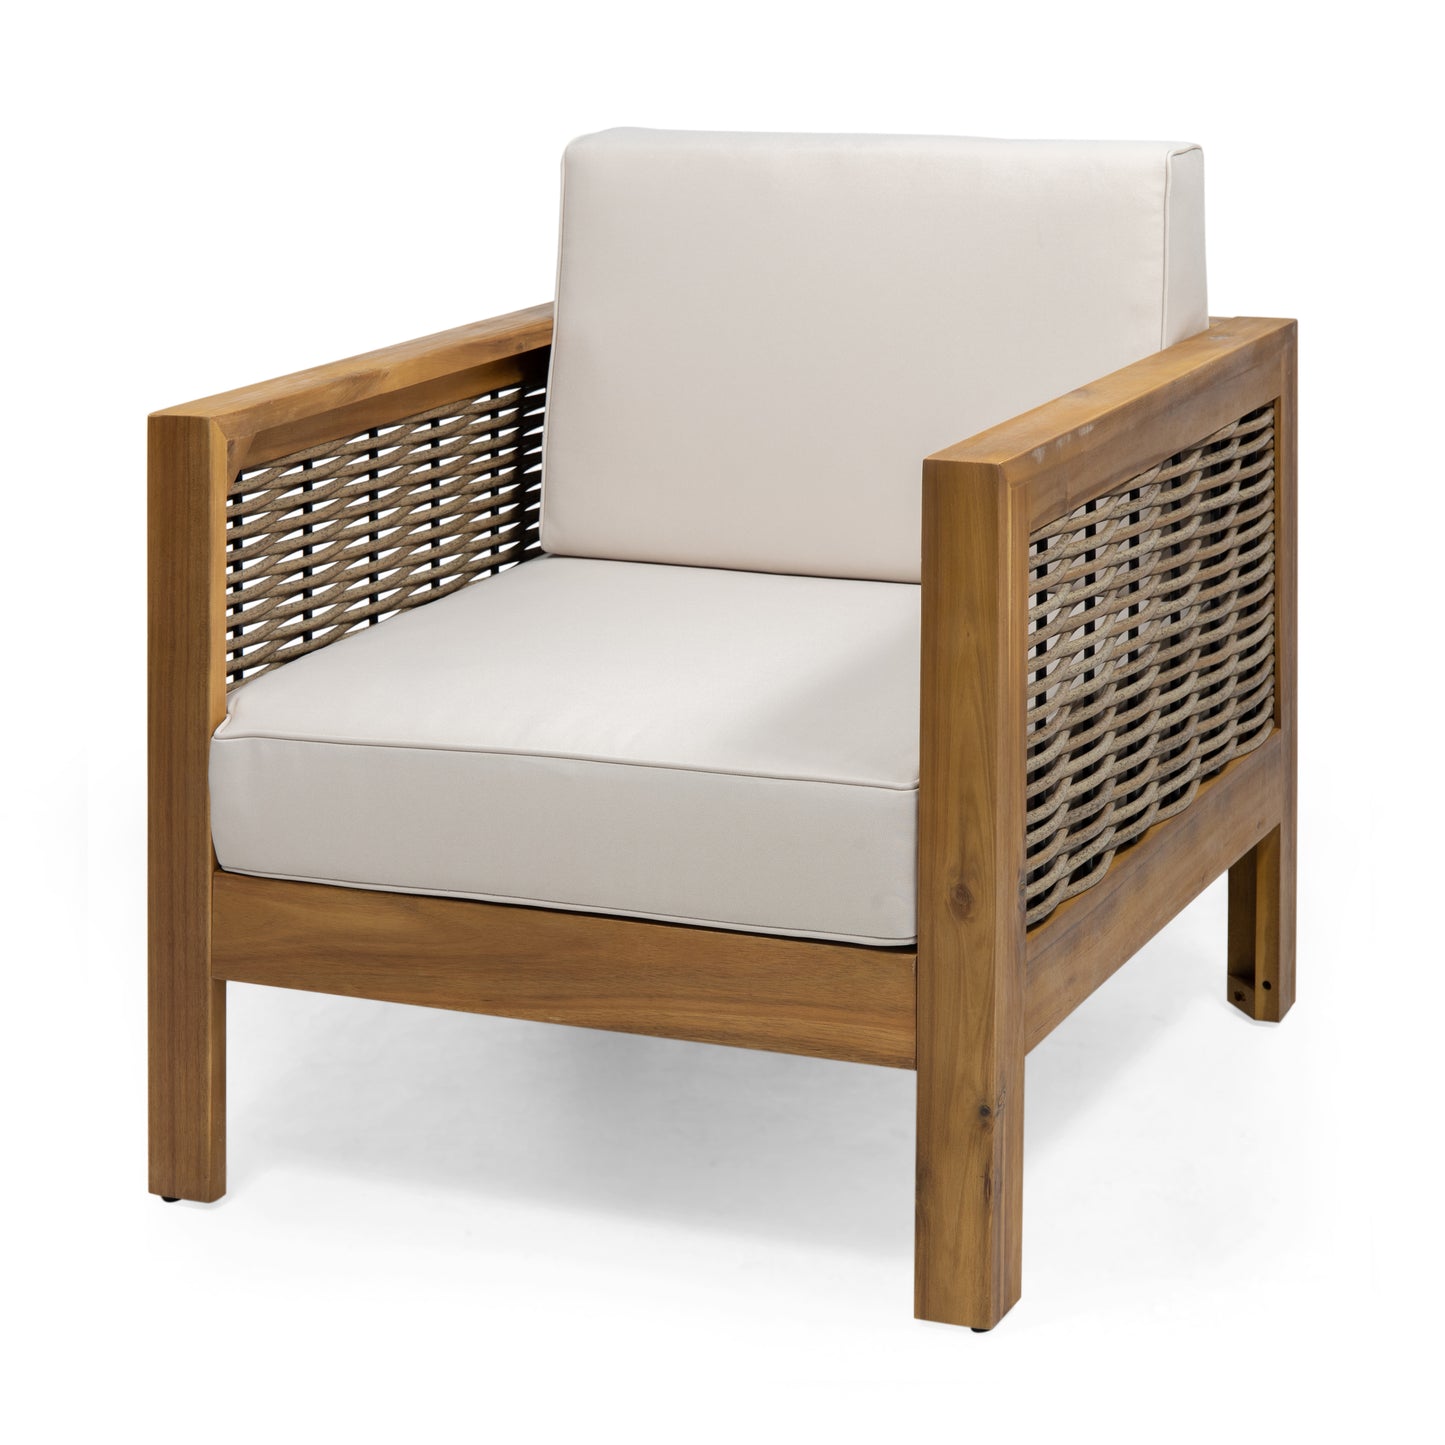 Mayes Outdoor 4 Seater Acacia Wood Chat Set with Wicker Accents